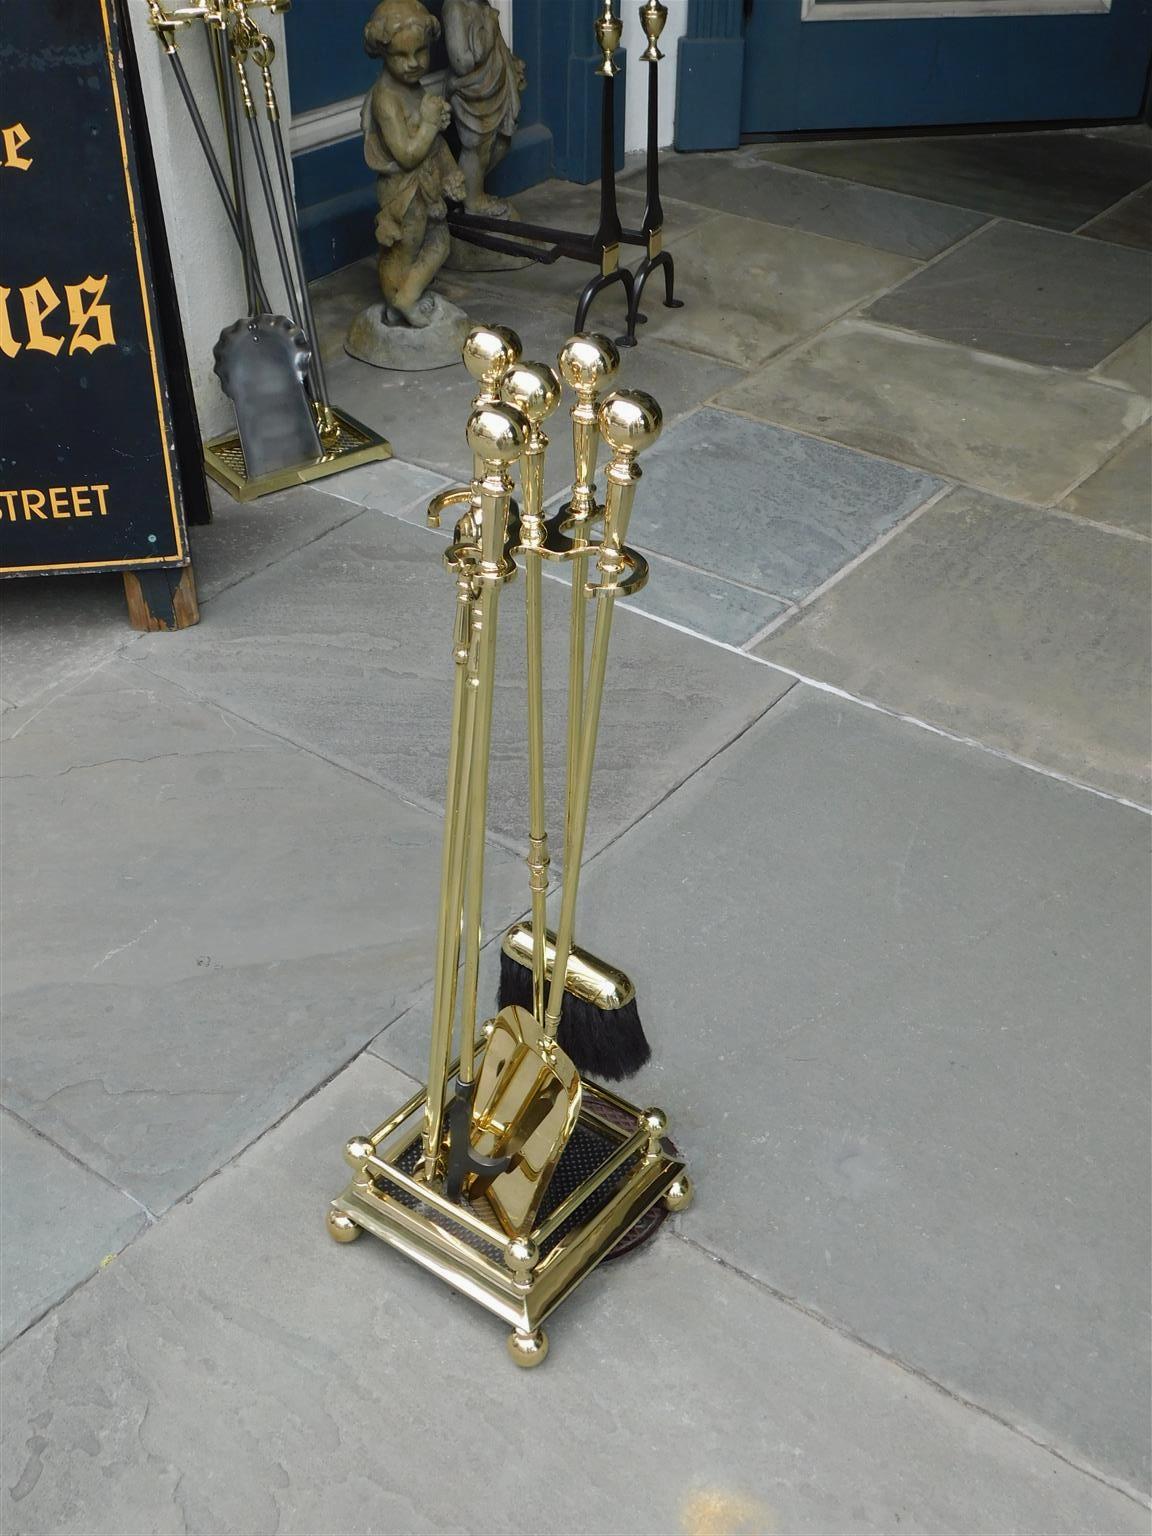 Cast Set of American Brass Ball Finial Fire Place Tools on Stand with Ball Feet, 19th